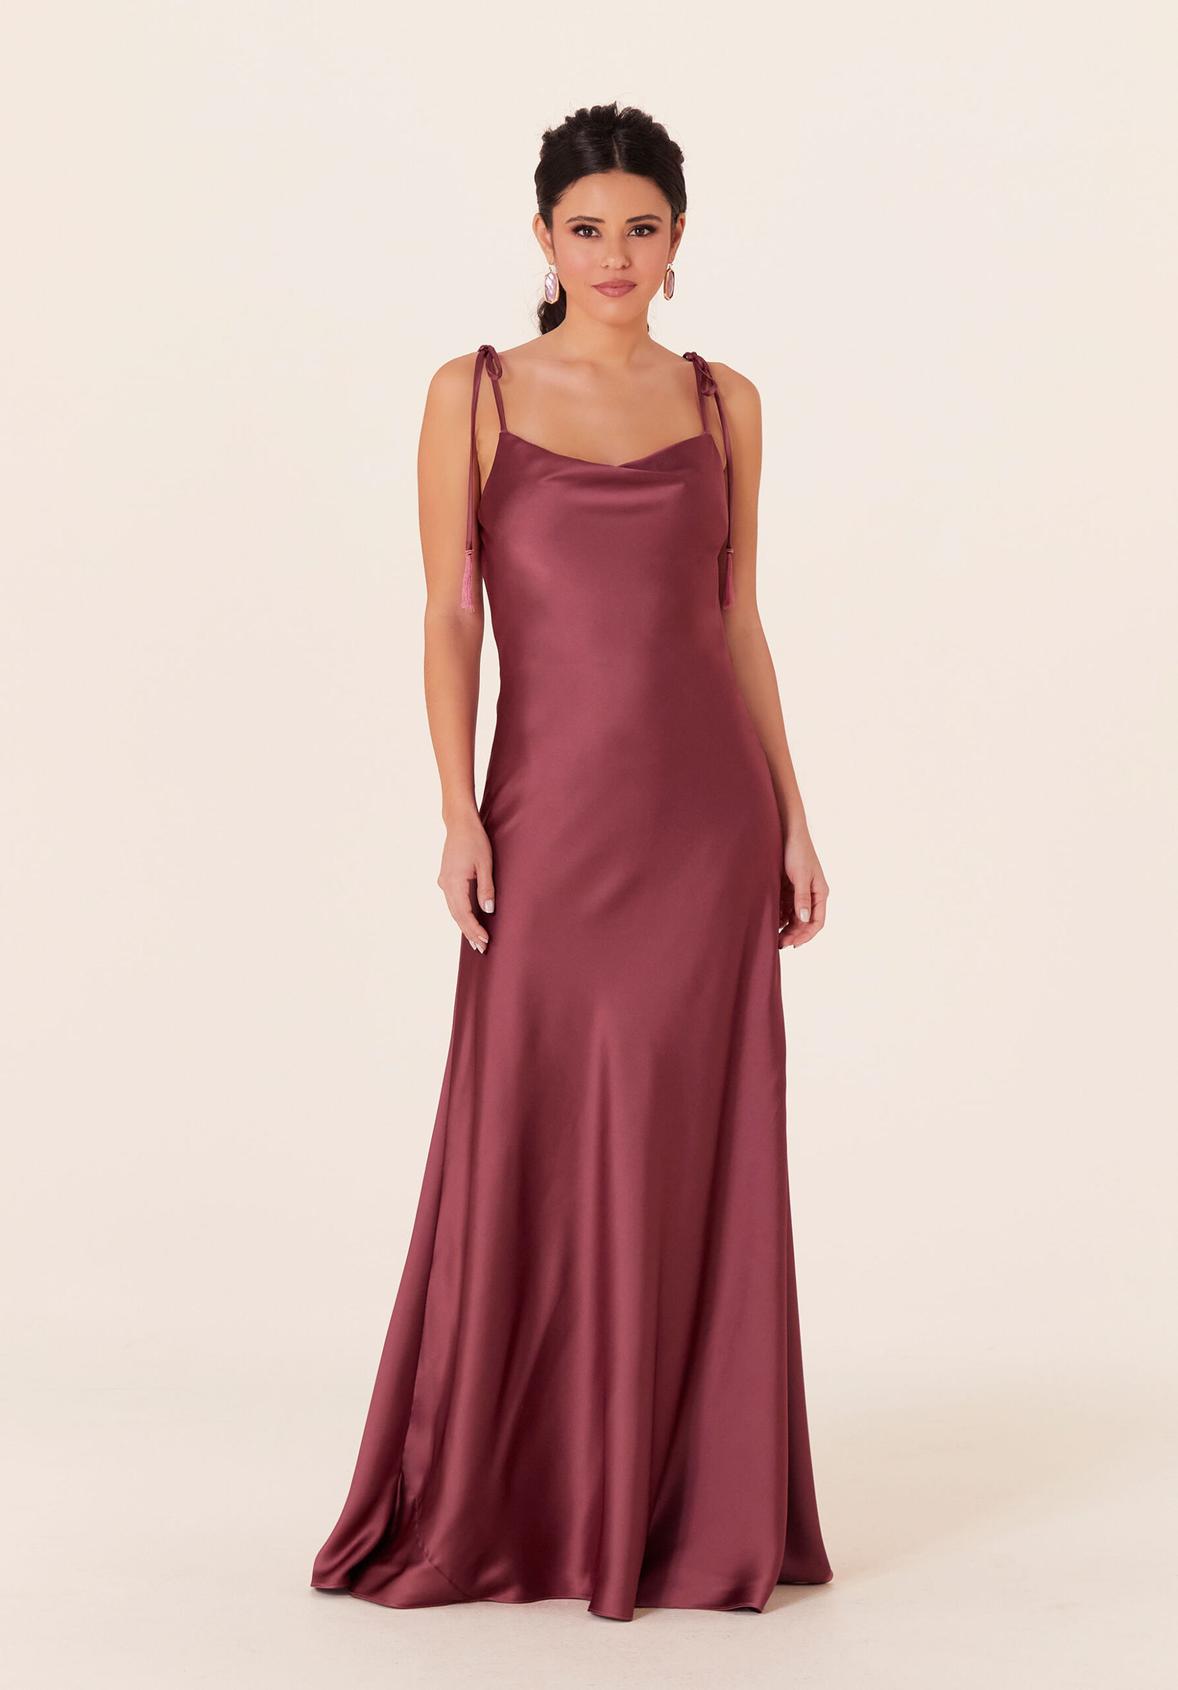 Luxe Satin A-line Bridesmaid Dress offers in Morilee